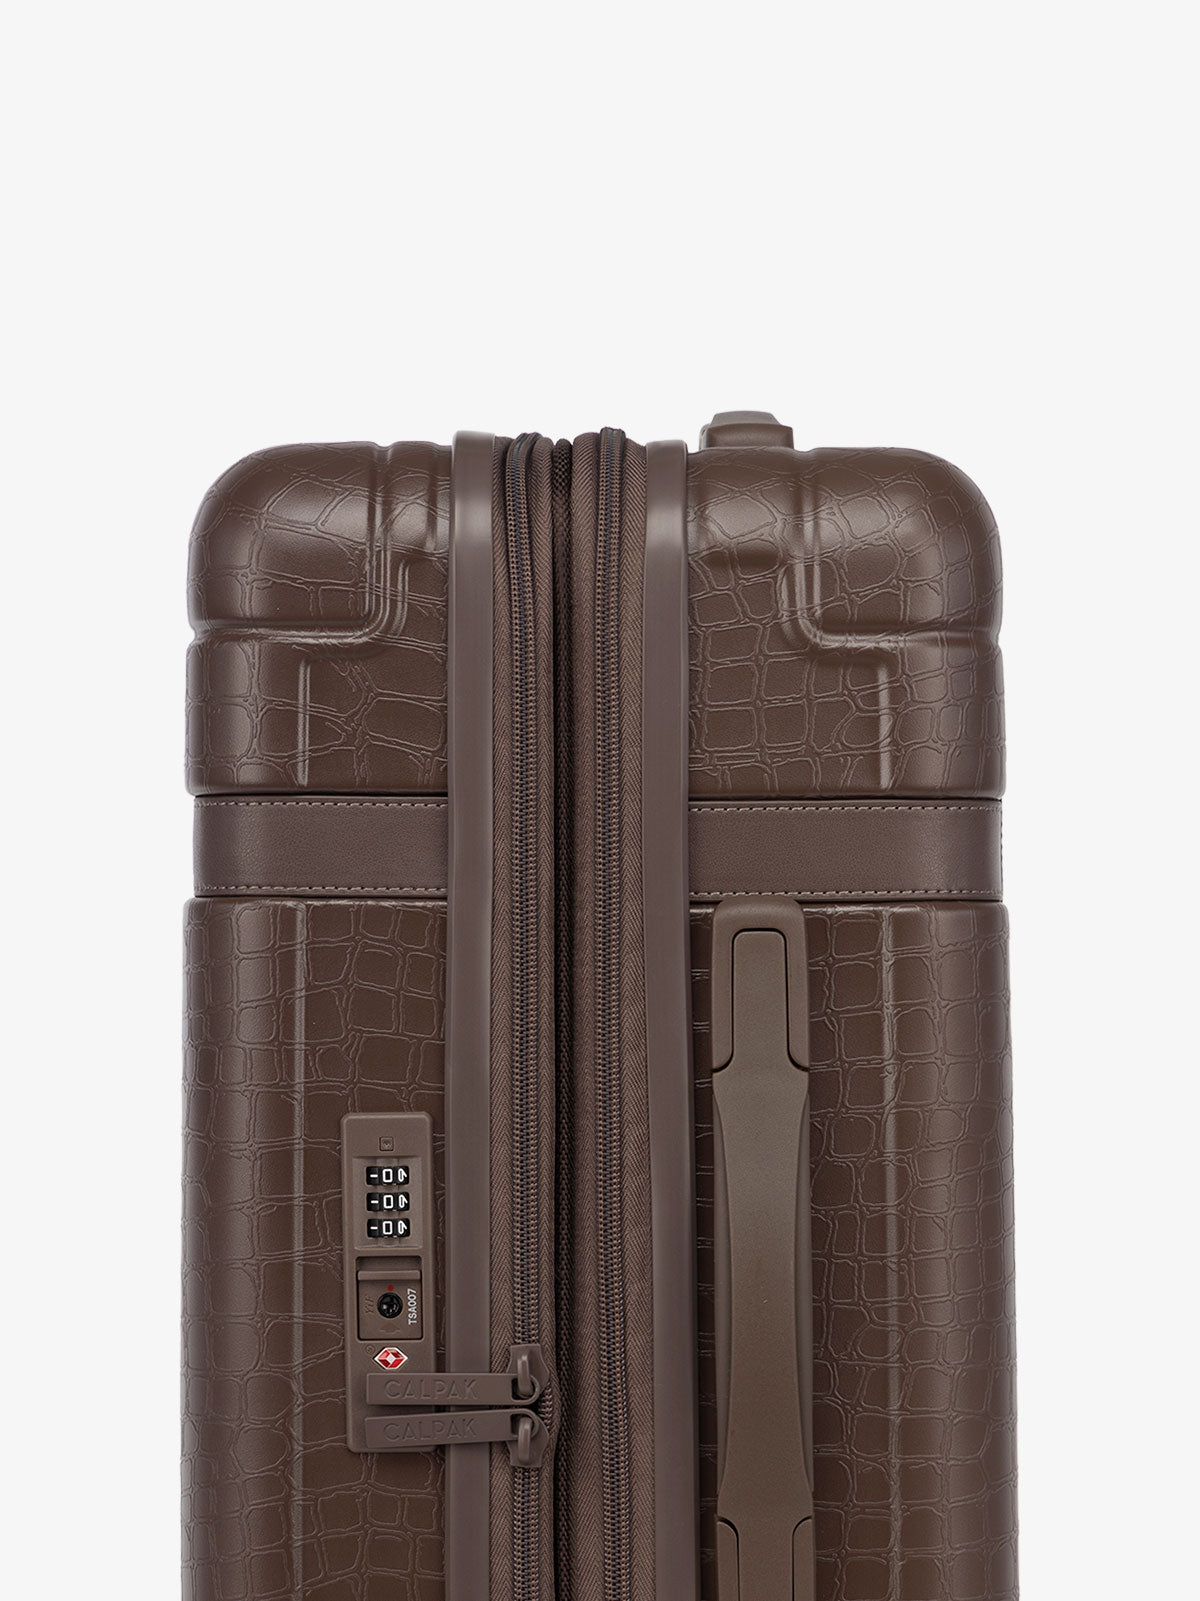 CALPAK TRNK carry on luggage with hardshell exterior, tsa lock and top and side handles in espresso